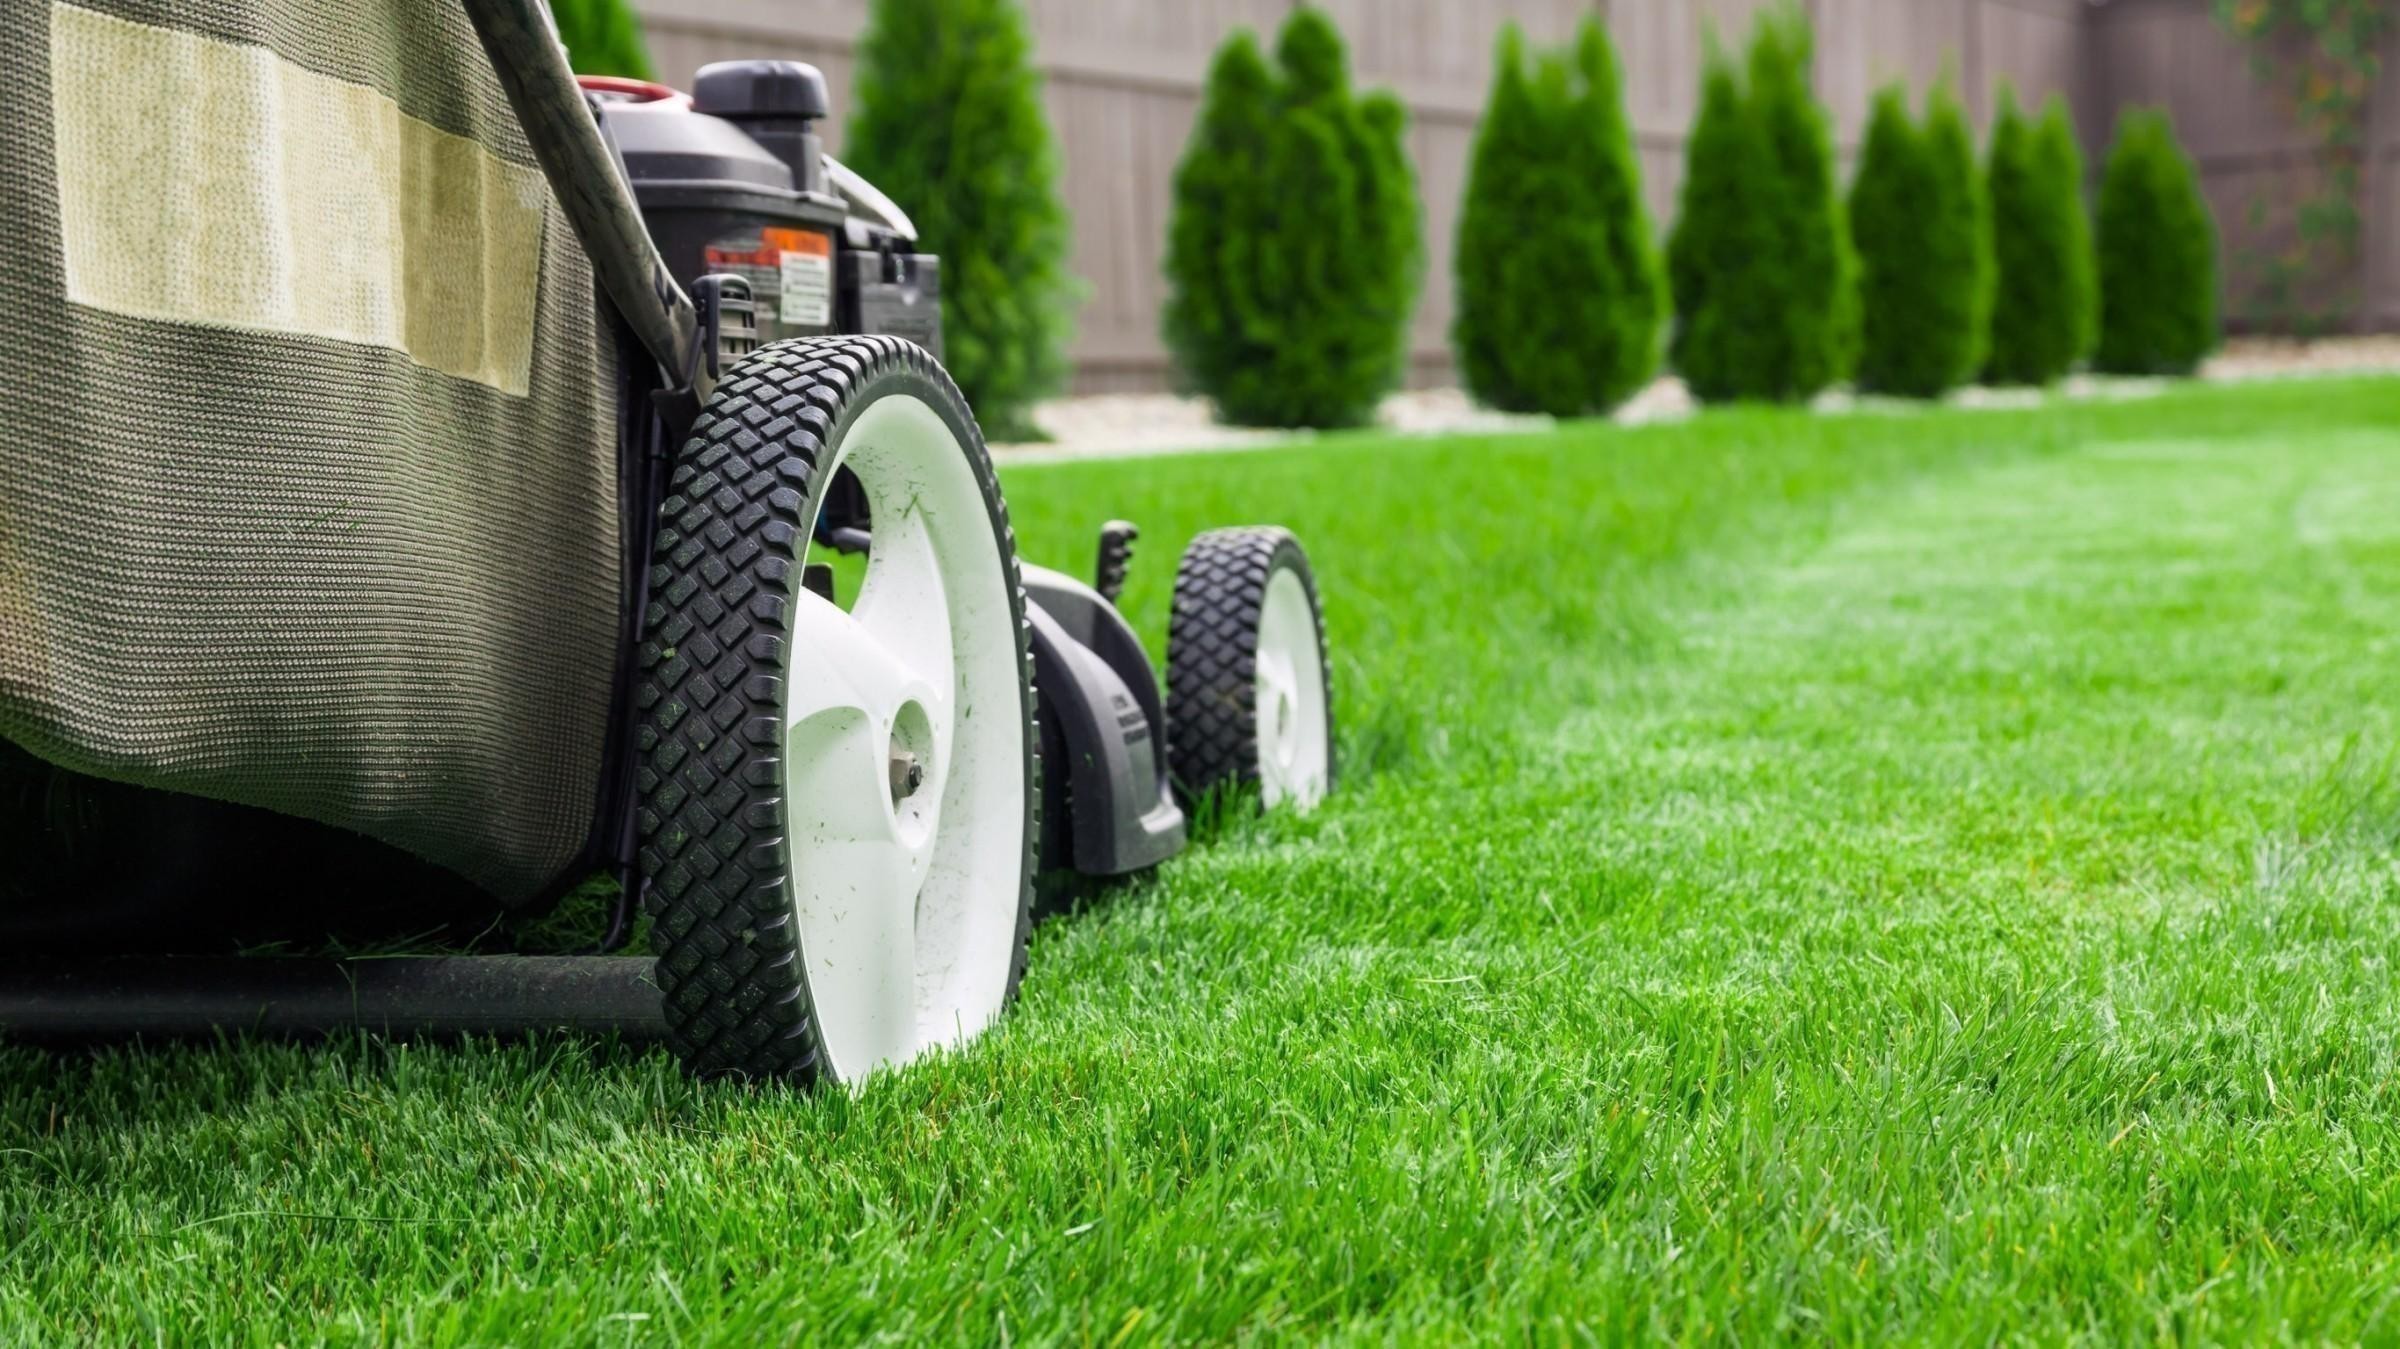 Lawnmowing and Gardening Franchise - Territories...Business For Sale